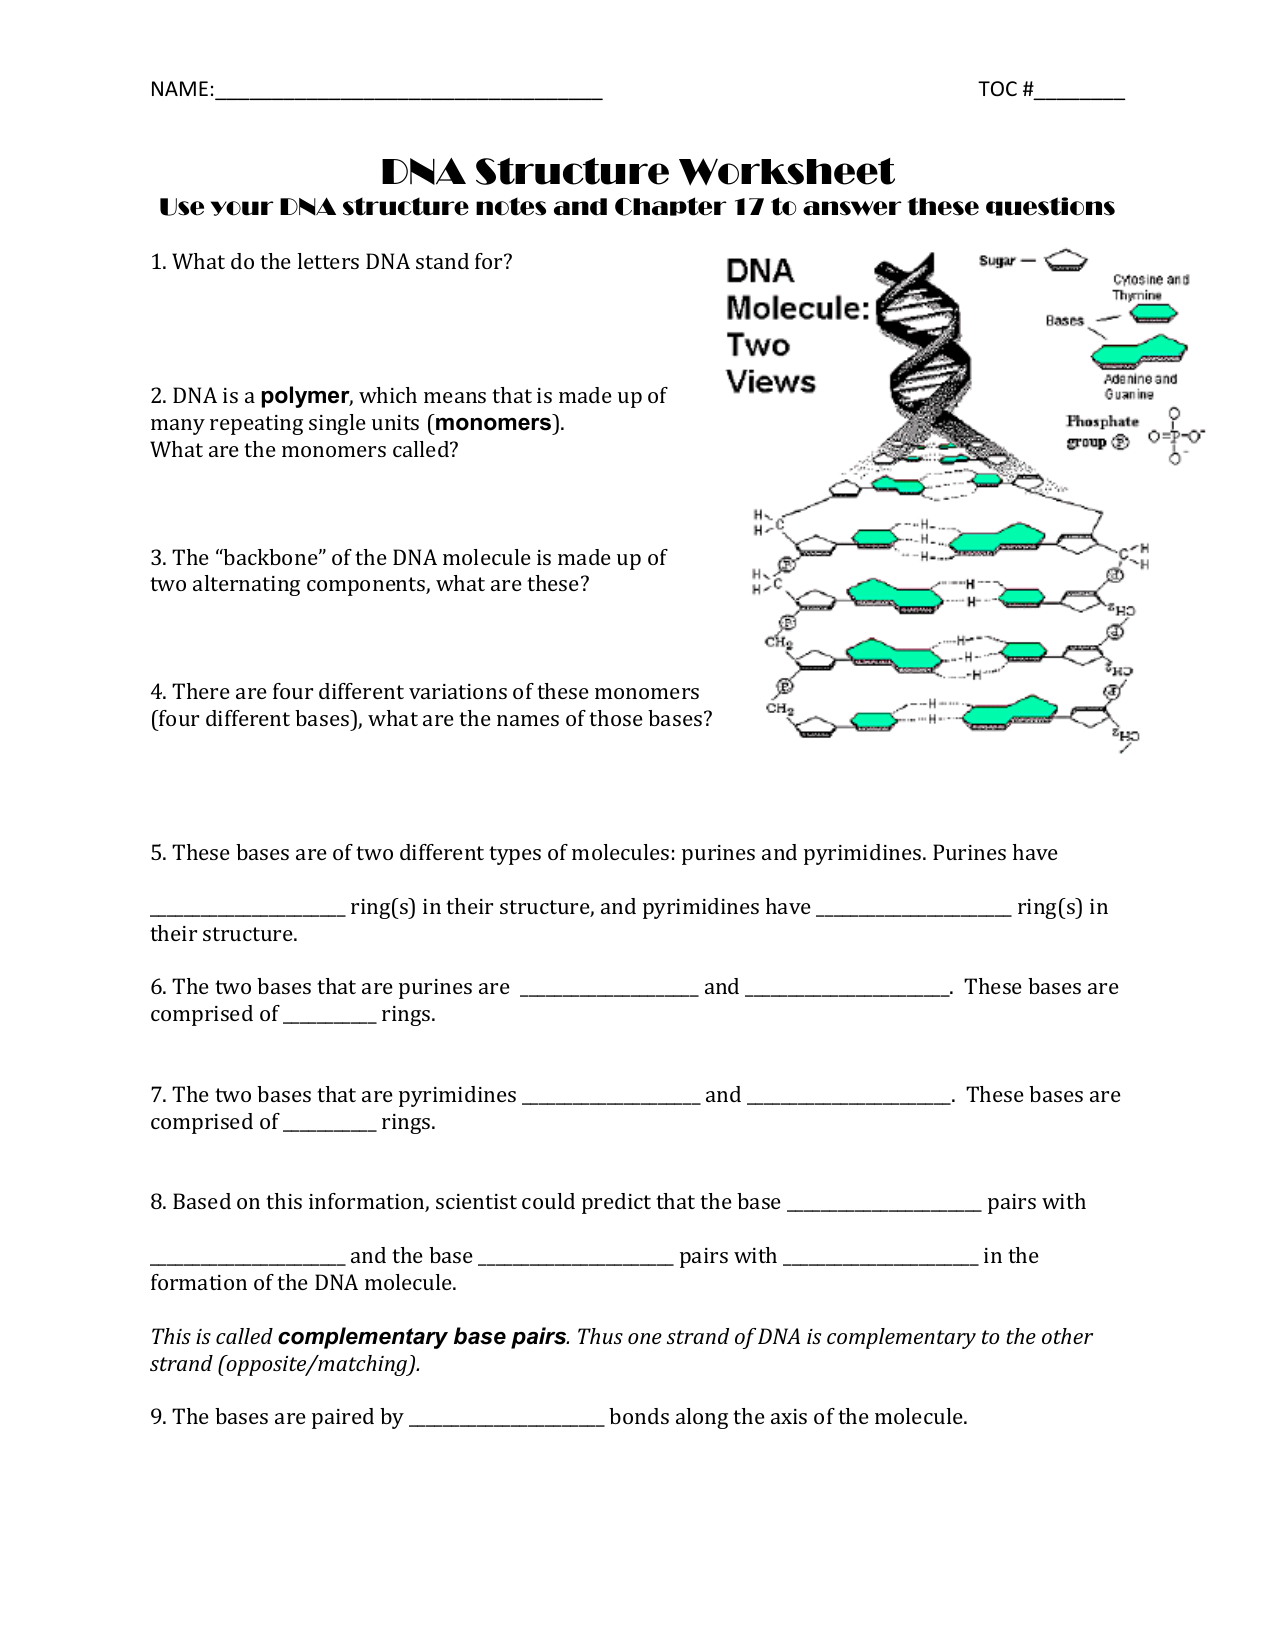 The Letters Dna Stand For Worksheet Answers Mamiihondenk db excel com